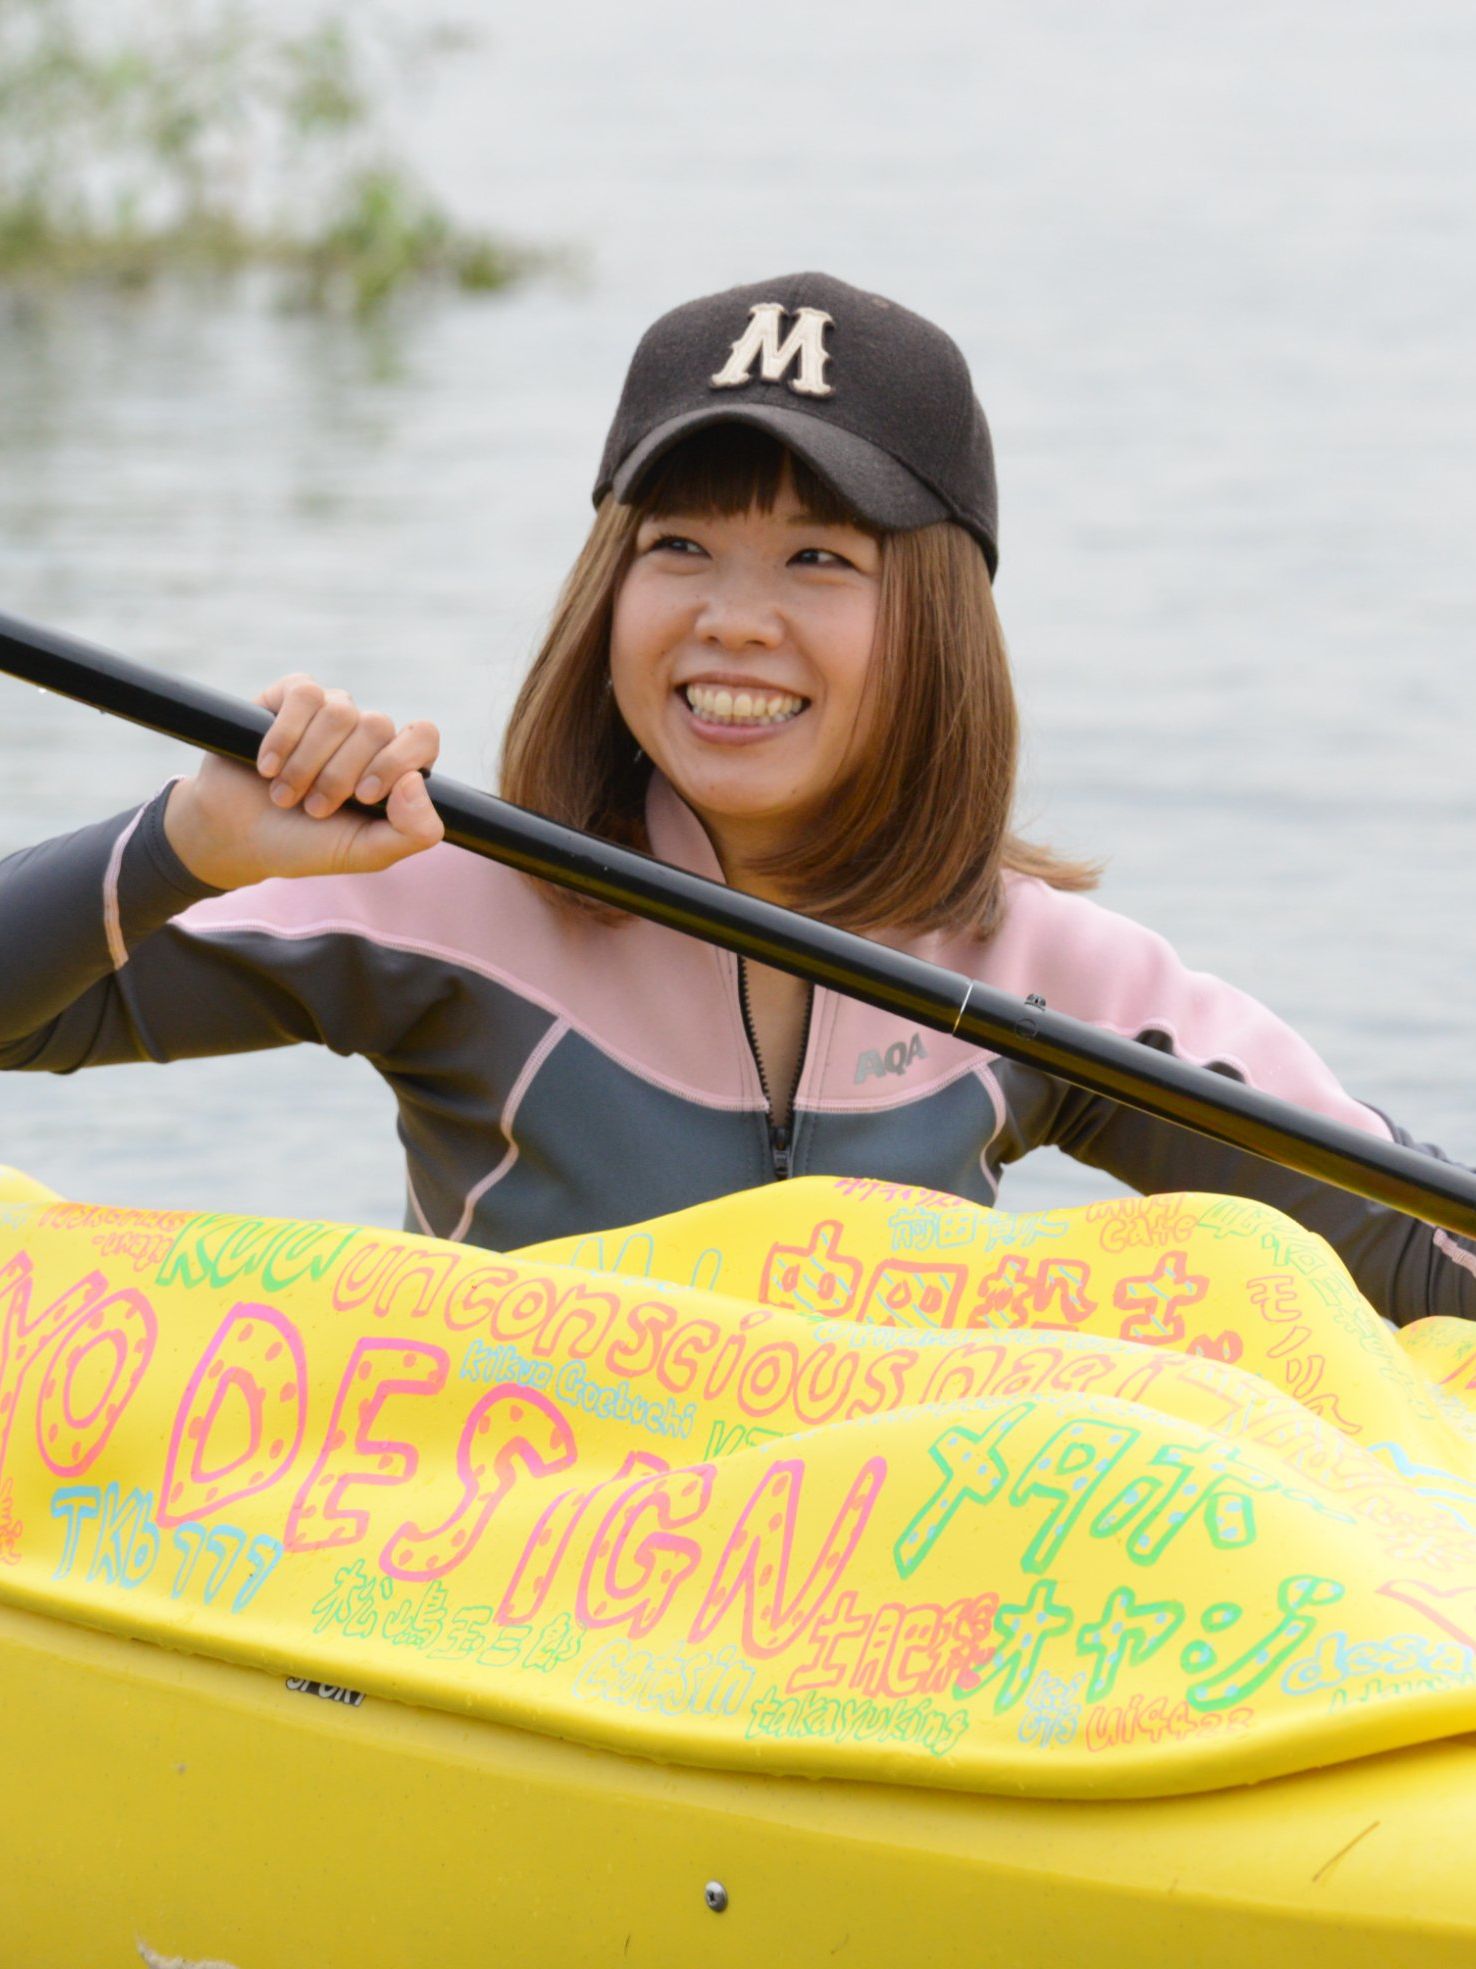 Japanese court: Vagina kayak is legal, sharing is not | CNN